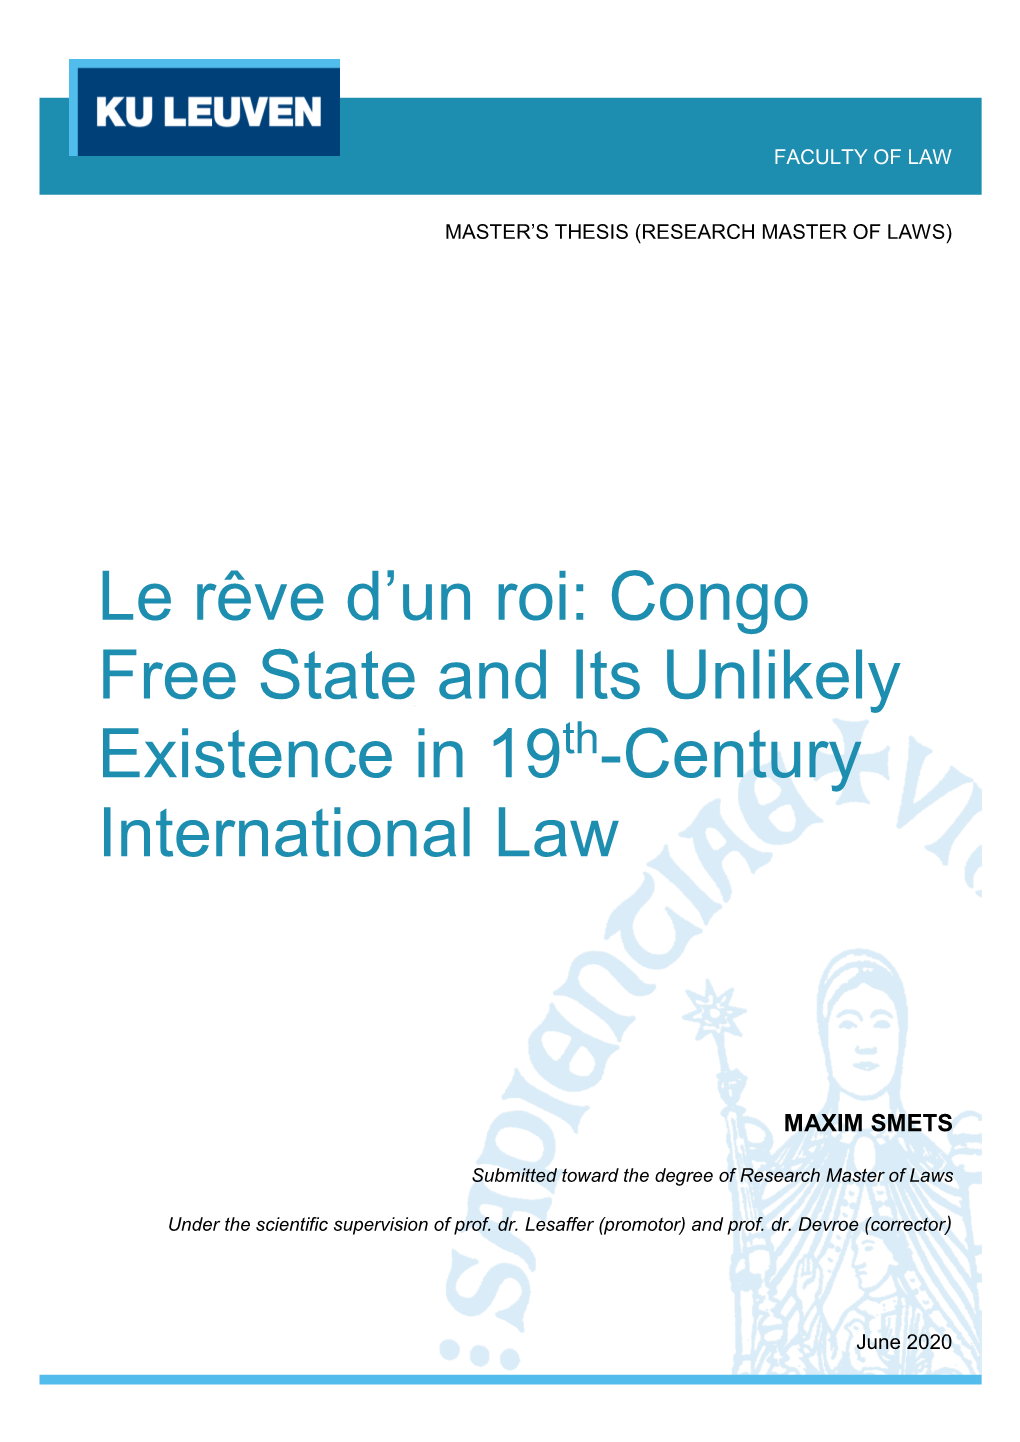 Congo Free State and Its Unlikely Existence in 19Th-Century International Law